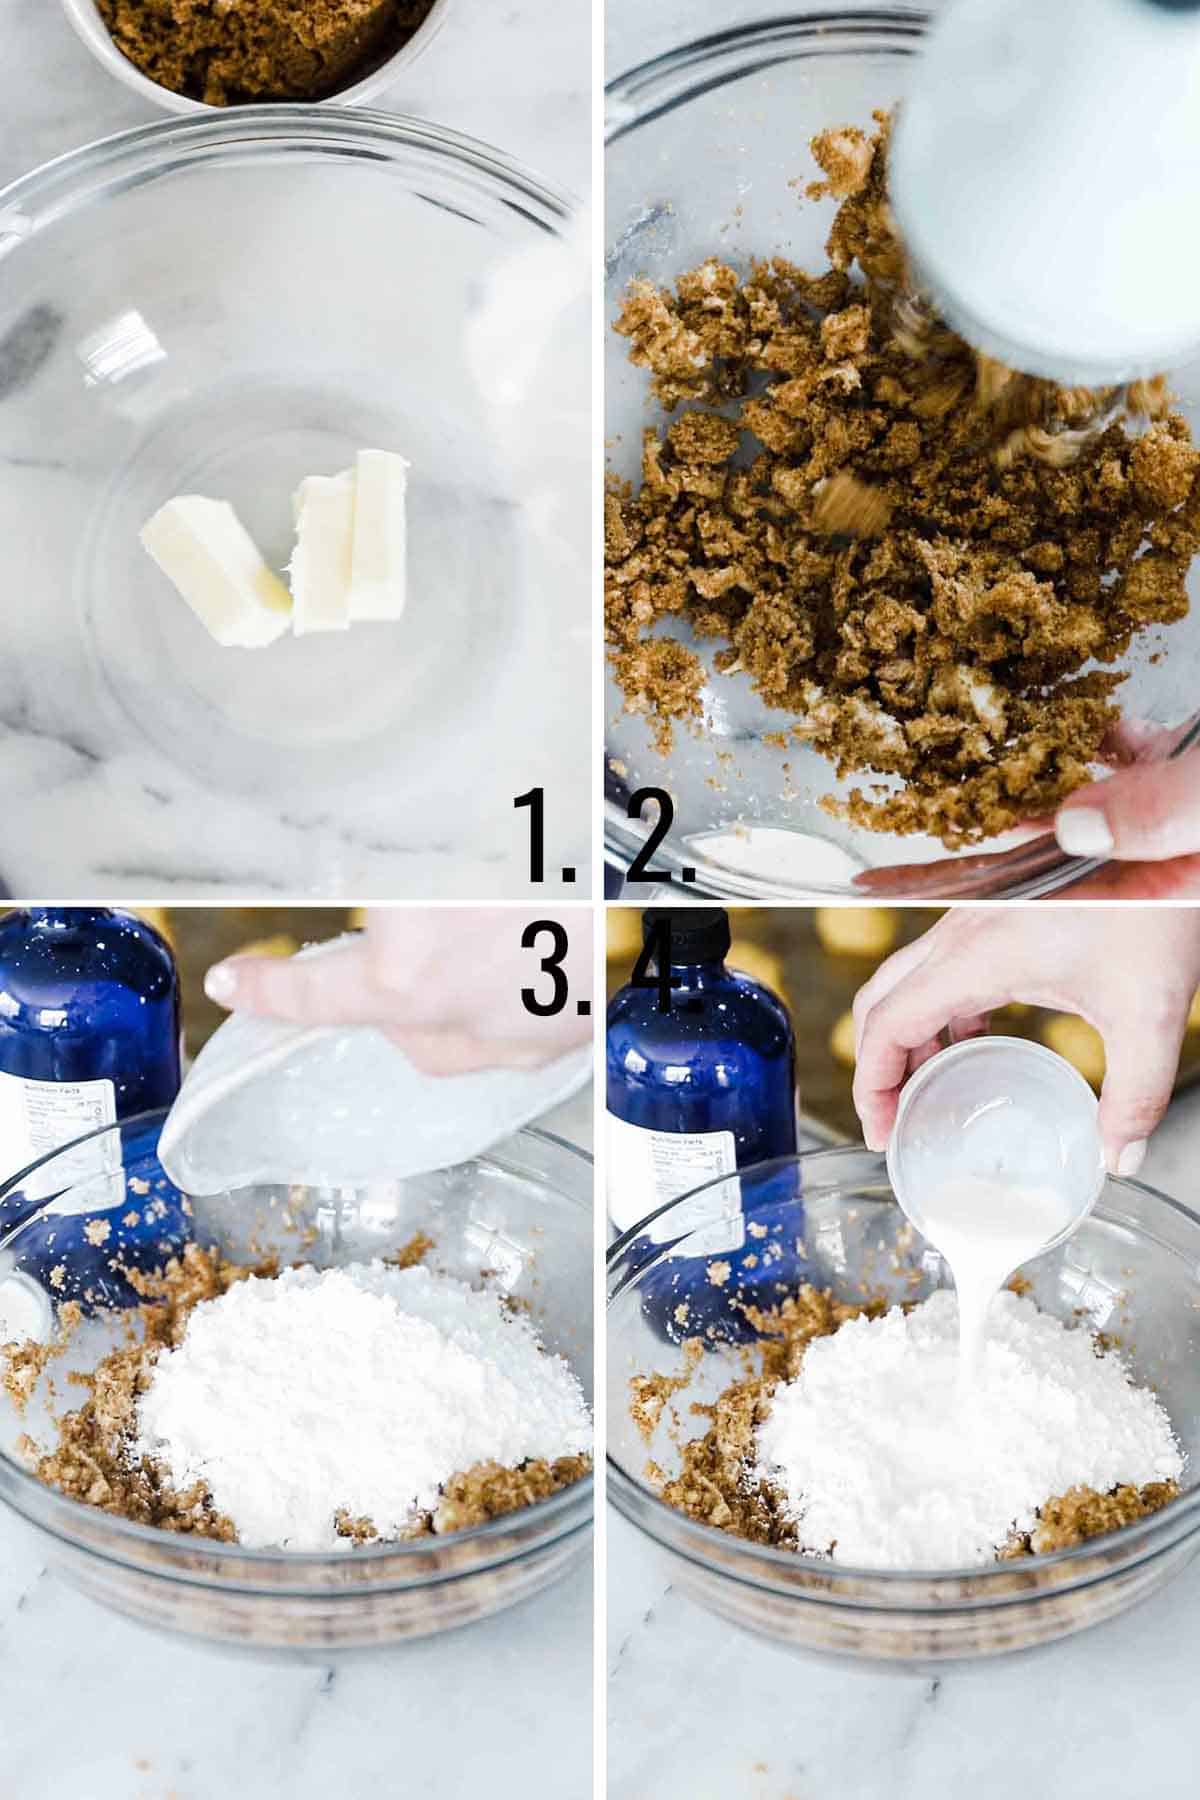 How to make brown sugar frosting.